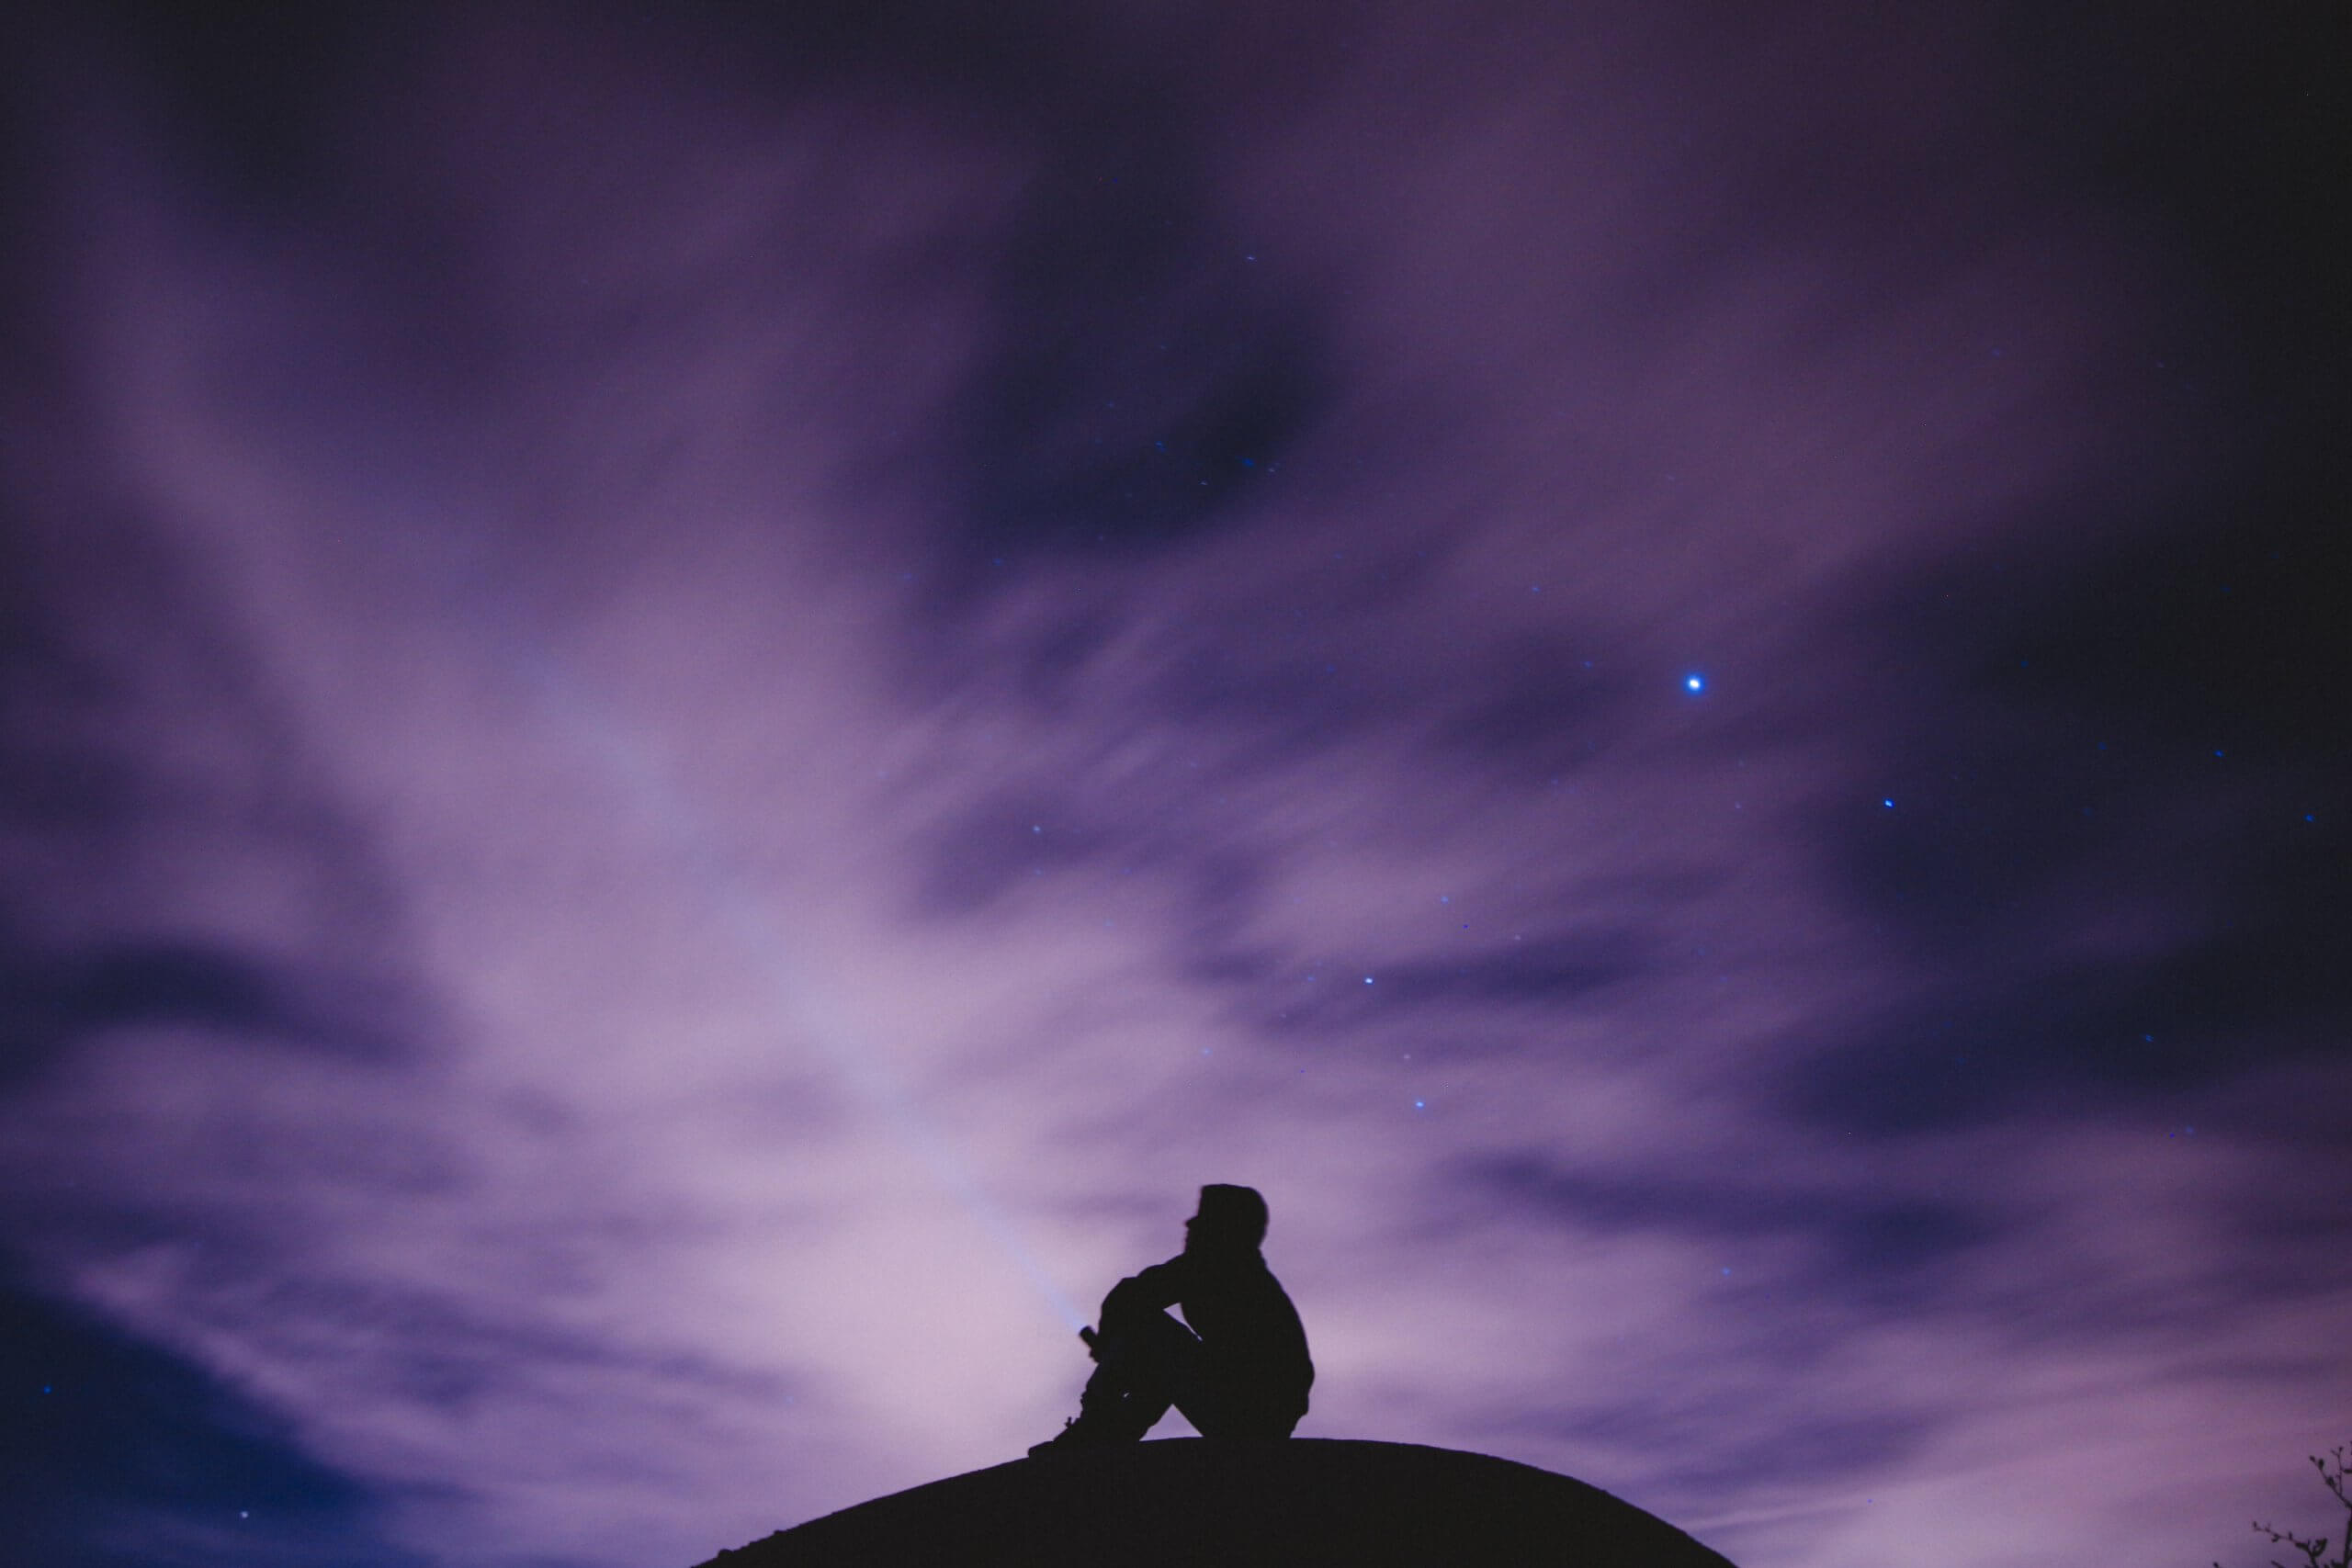 Silhouette of youth siting on rock pointing flashlight up into dark sky with purple clouds and a few stars and plants